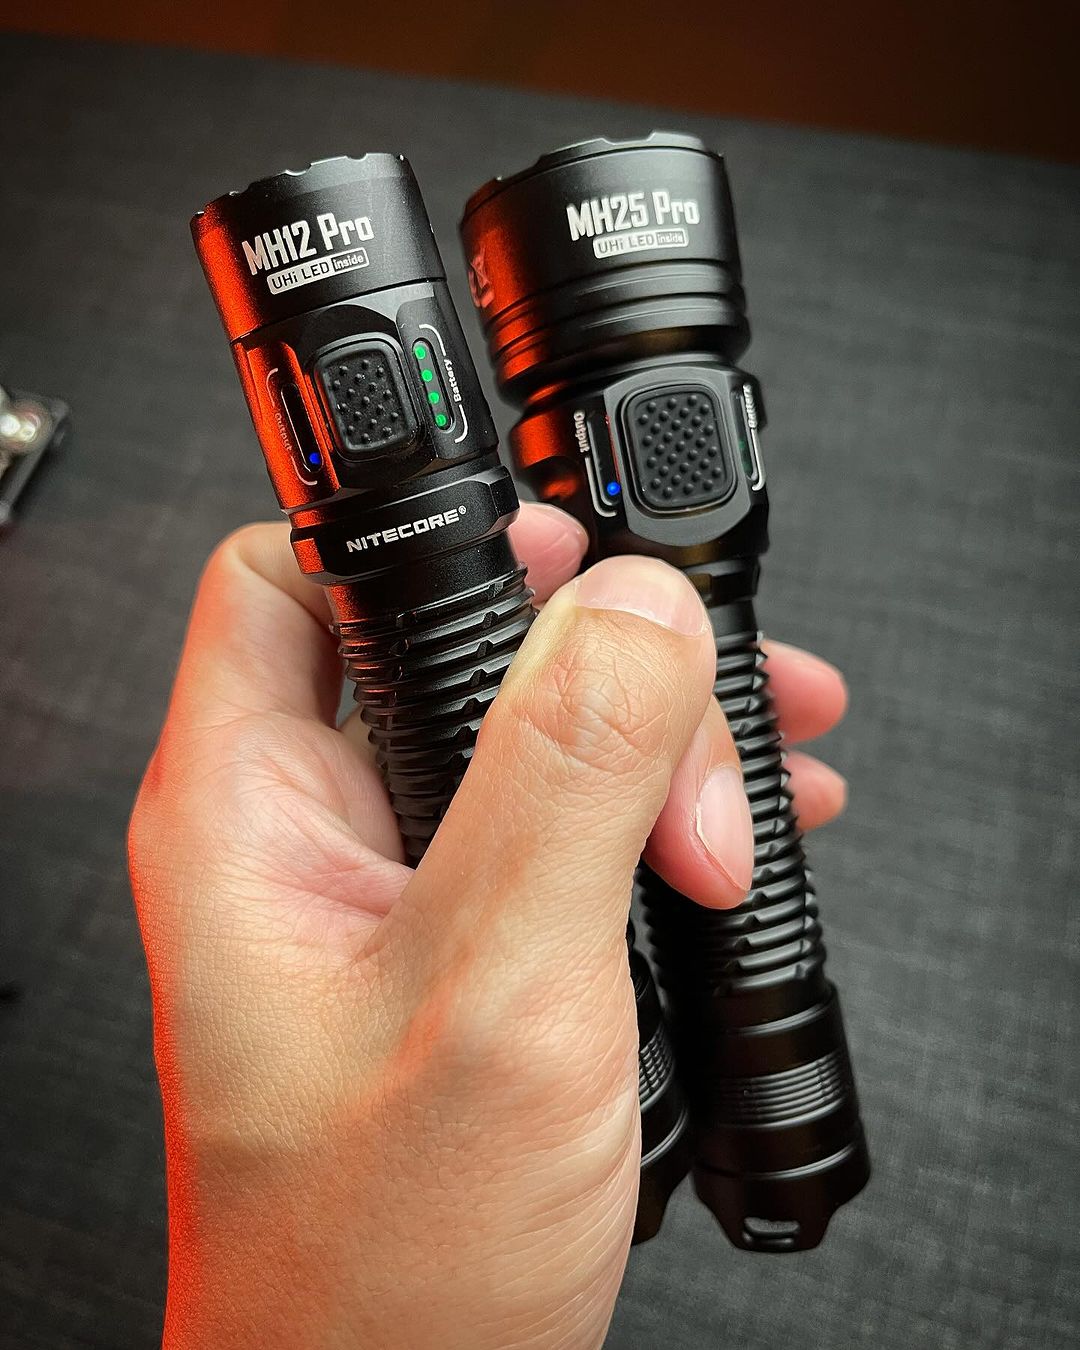 Tactical Flashlights - Travel Safety Tips